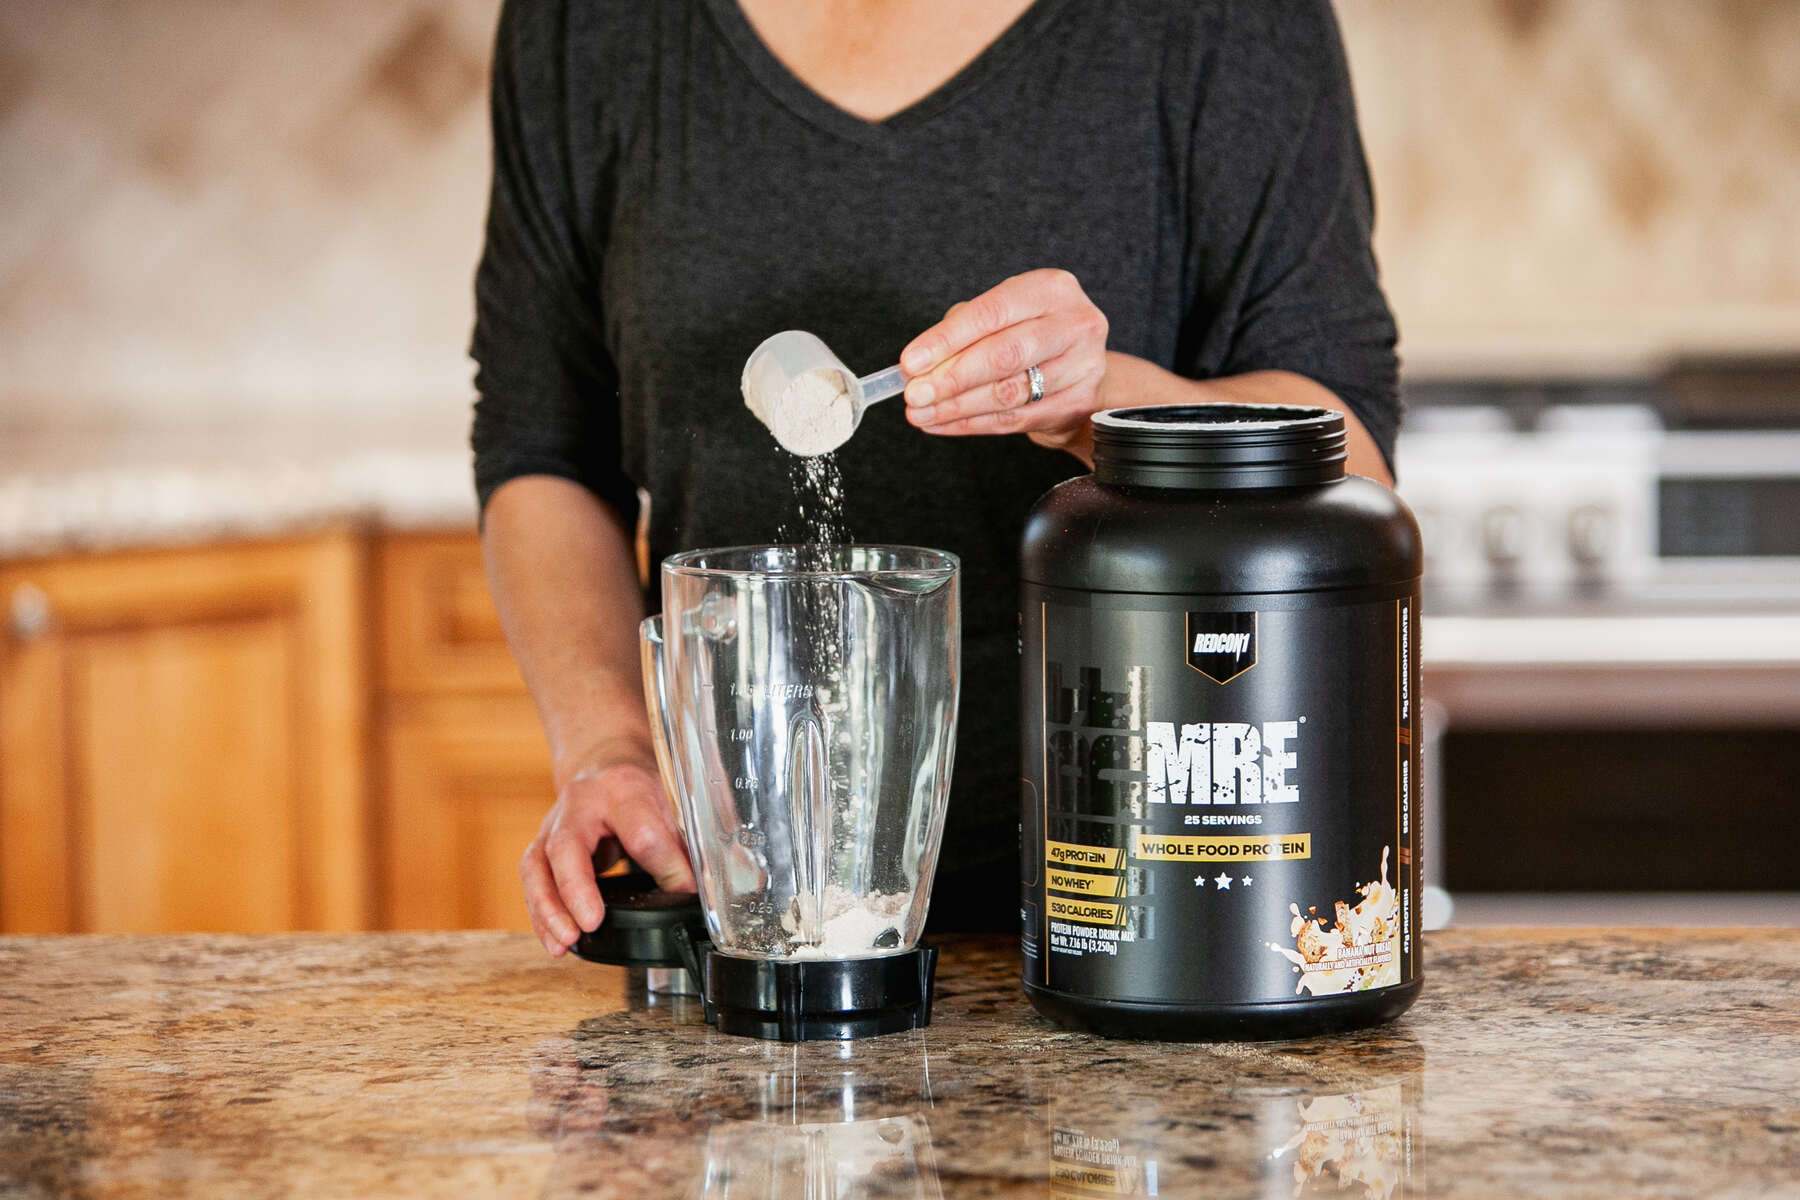 A person in a black top is scooping powder from a black container of Redcon1 MRE Whole Food Protein into a blender on a kitchen counter